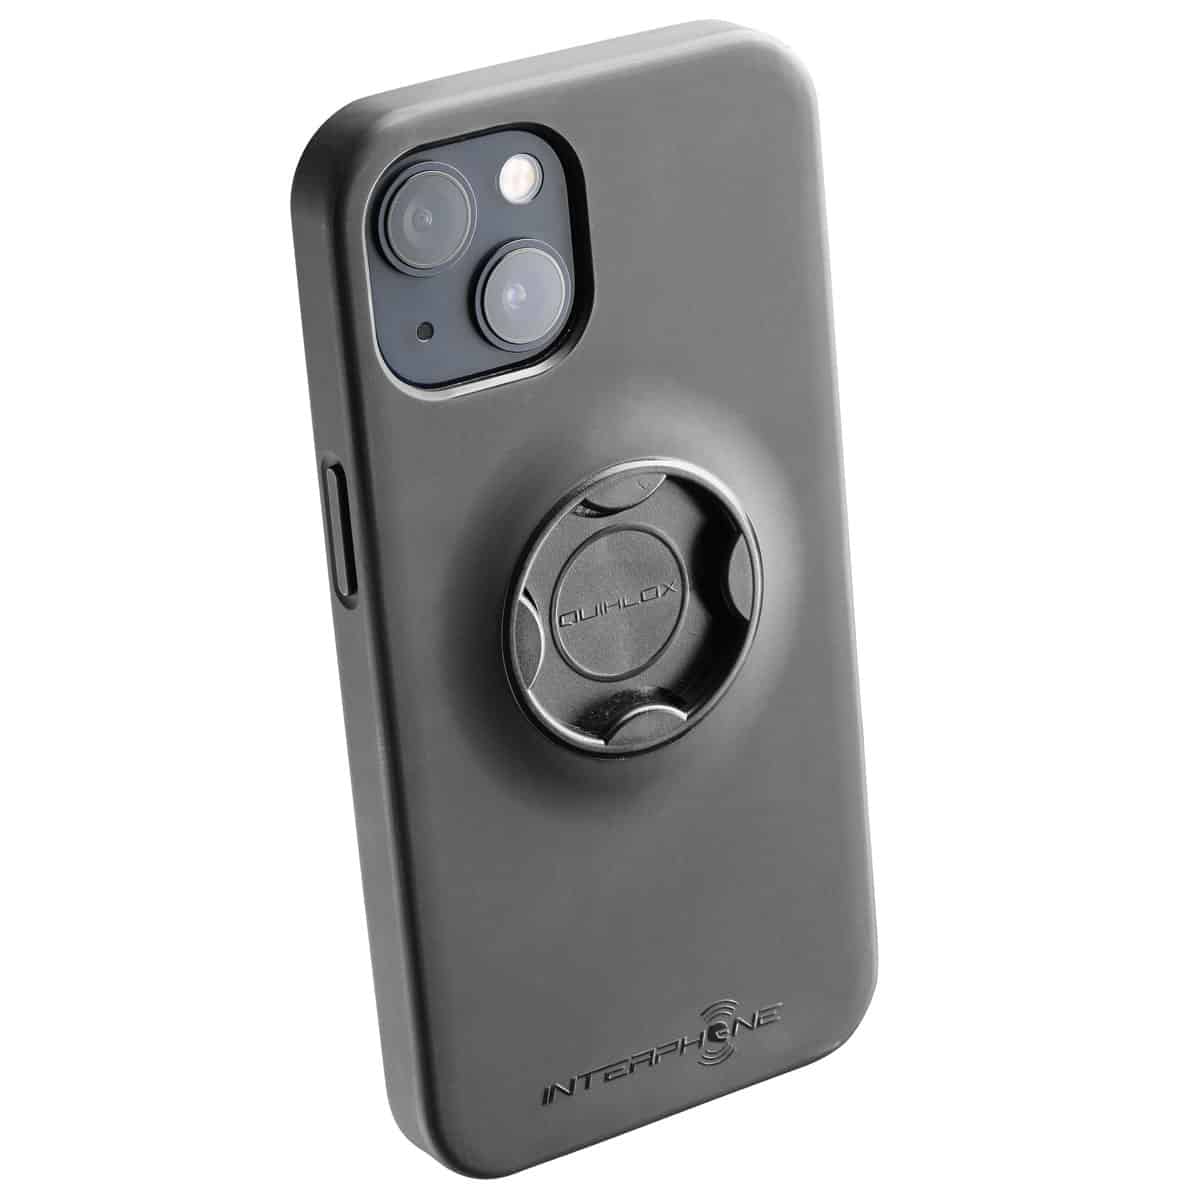 The Quiklox iPhone phone case: The replacement phone case, equipped to connect securely to any QuikLox mount in a flash 13 14